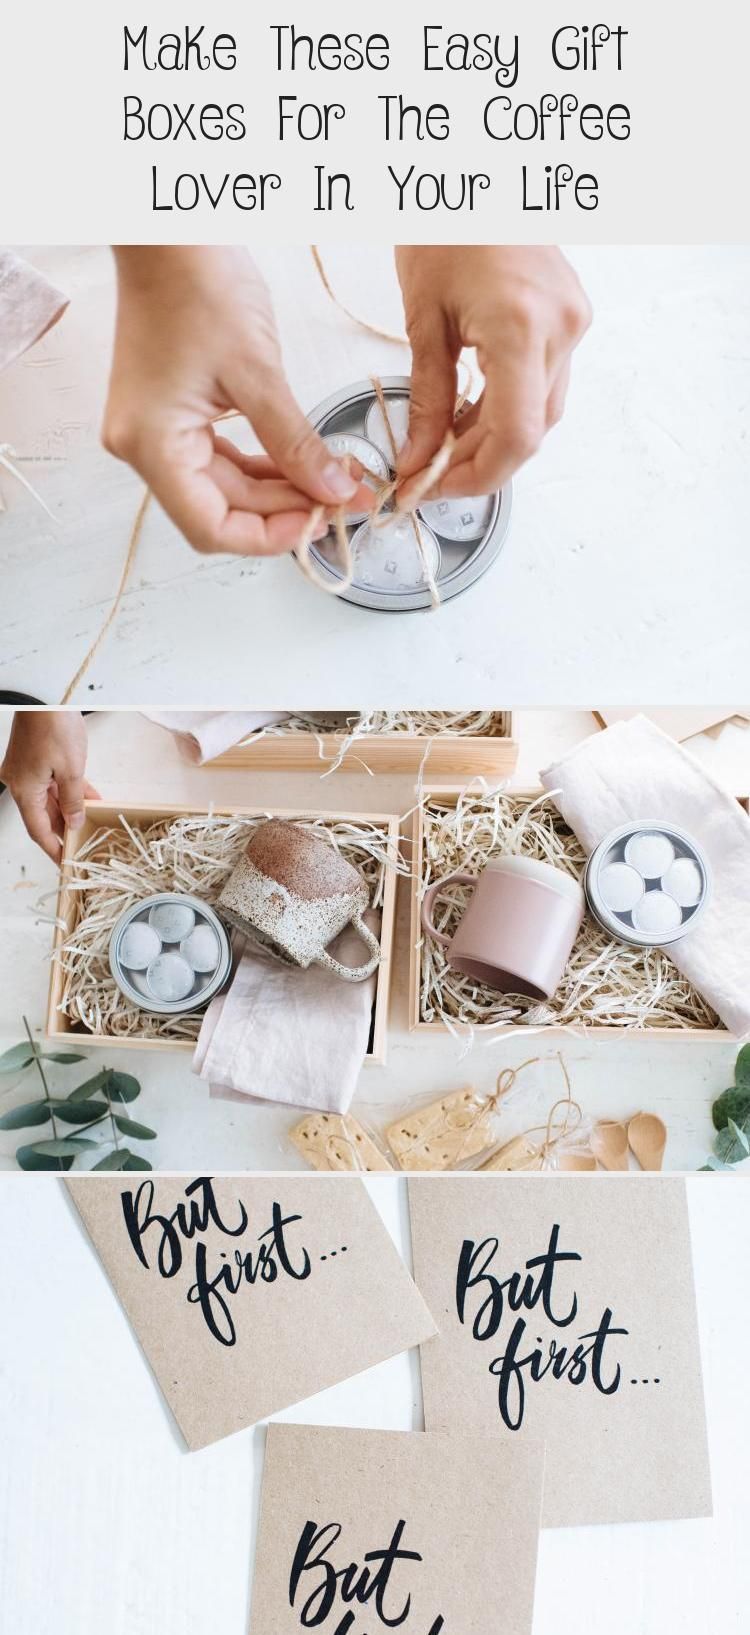 Make These Easy Gift Boxes For The Coffee Lover In Your Life - Ella's Home Blog -   17 diy projects For Couples friends ideas